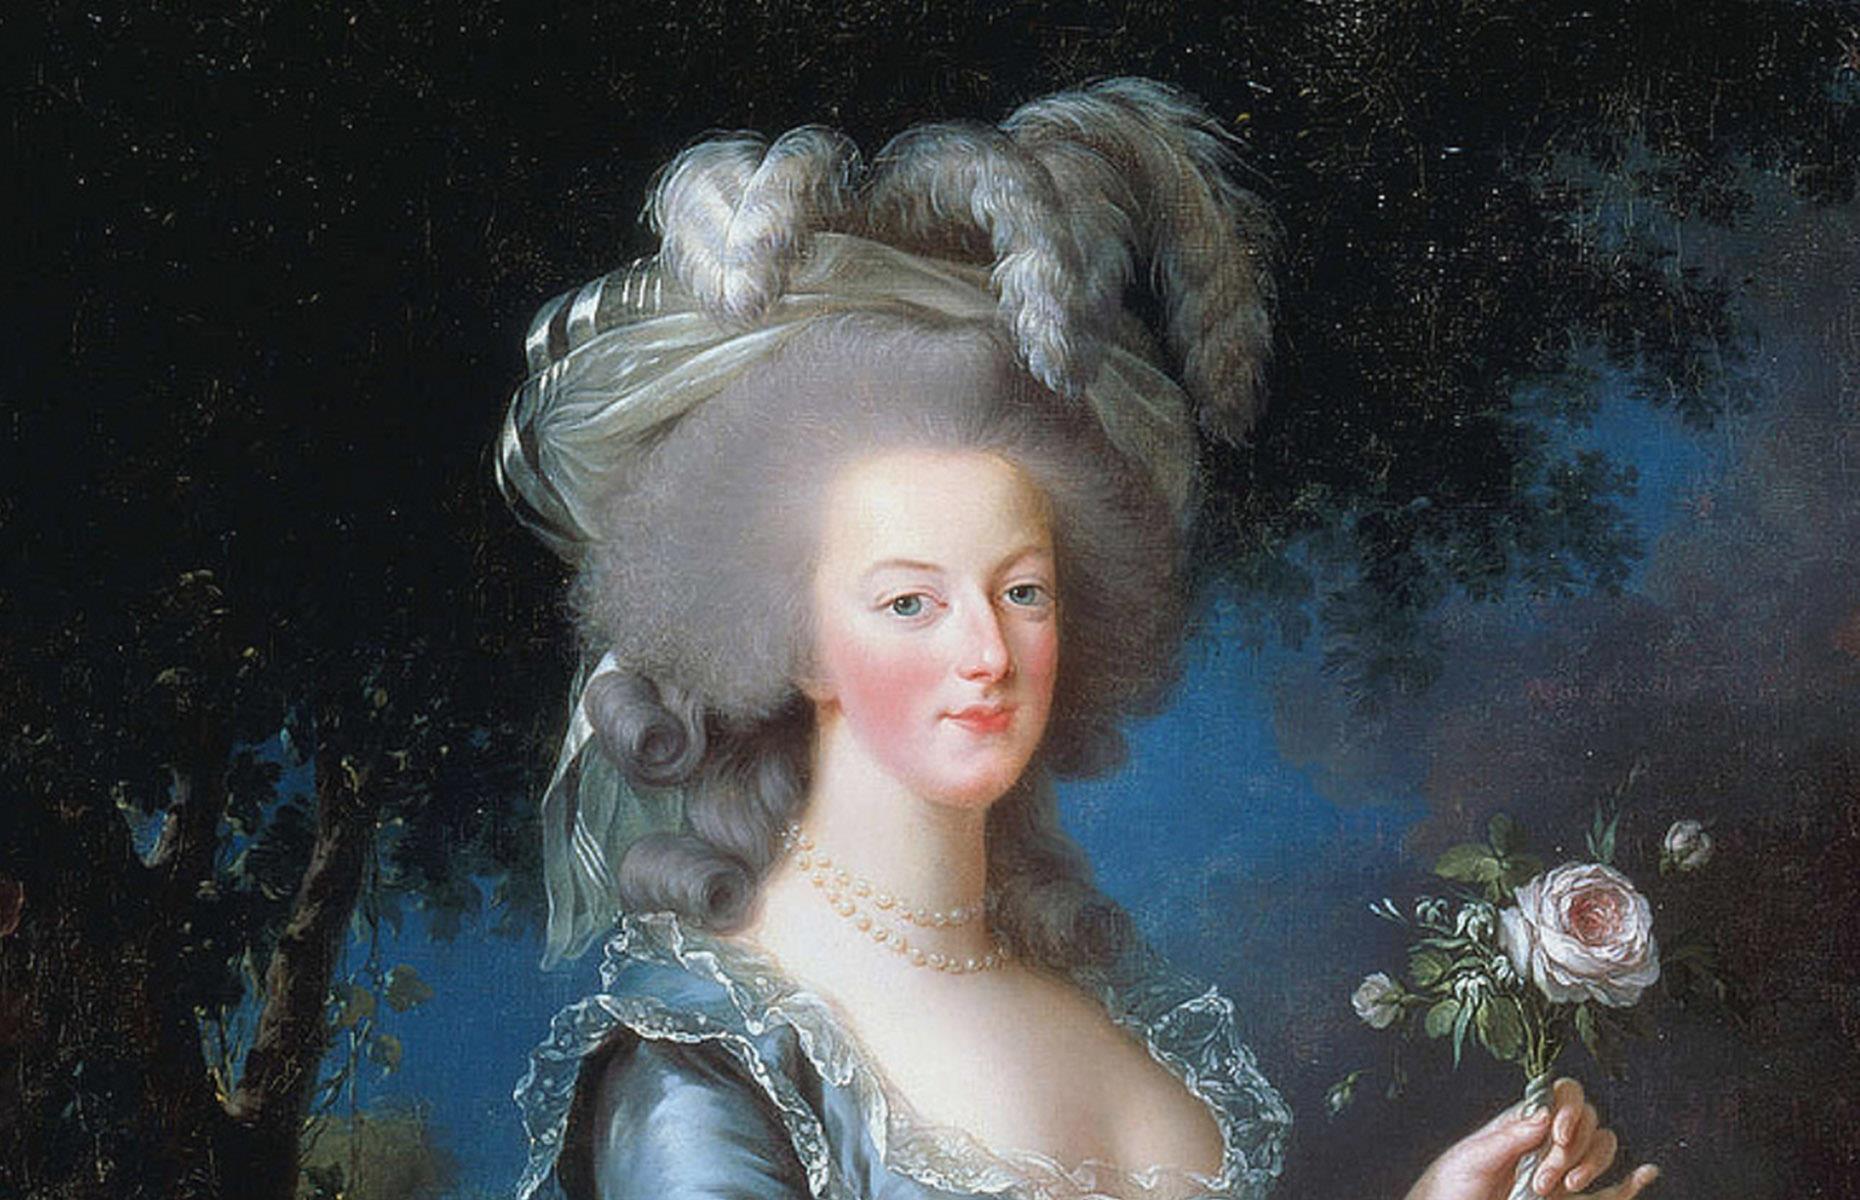 <p>It's widely believed that Marie Antoinette's issues with her marriage may have contributed to her wild spending habits. The king's lack of intimacy reportedly frustrated her, and the lonely queen is thought to have sought solace and distraction in her over-the-top lifestyle at the French court instead.</p>  <p>However, her subjects widely blamed Marie Antionette for the country's financial difficulties and even nicknamed her "Madame Déficit" due to her phenomenal spending.</p>  <p><strong>With that in mind, let's discover some of the things she blew a fortune on...</strong></p>